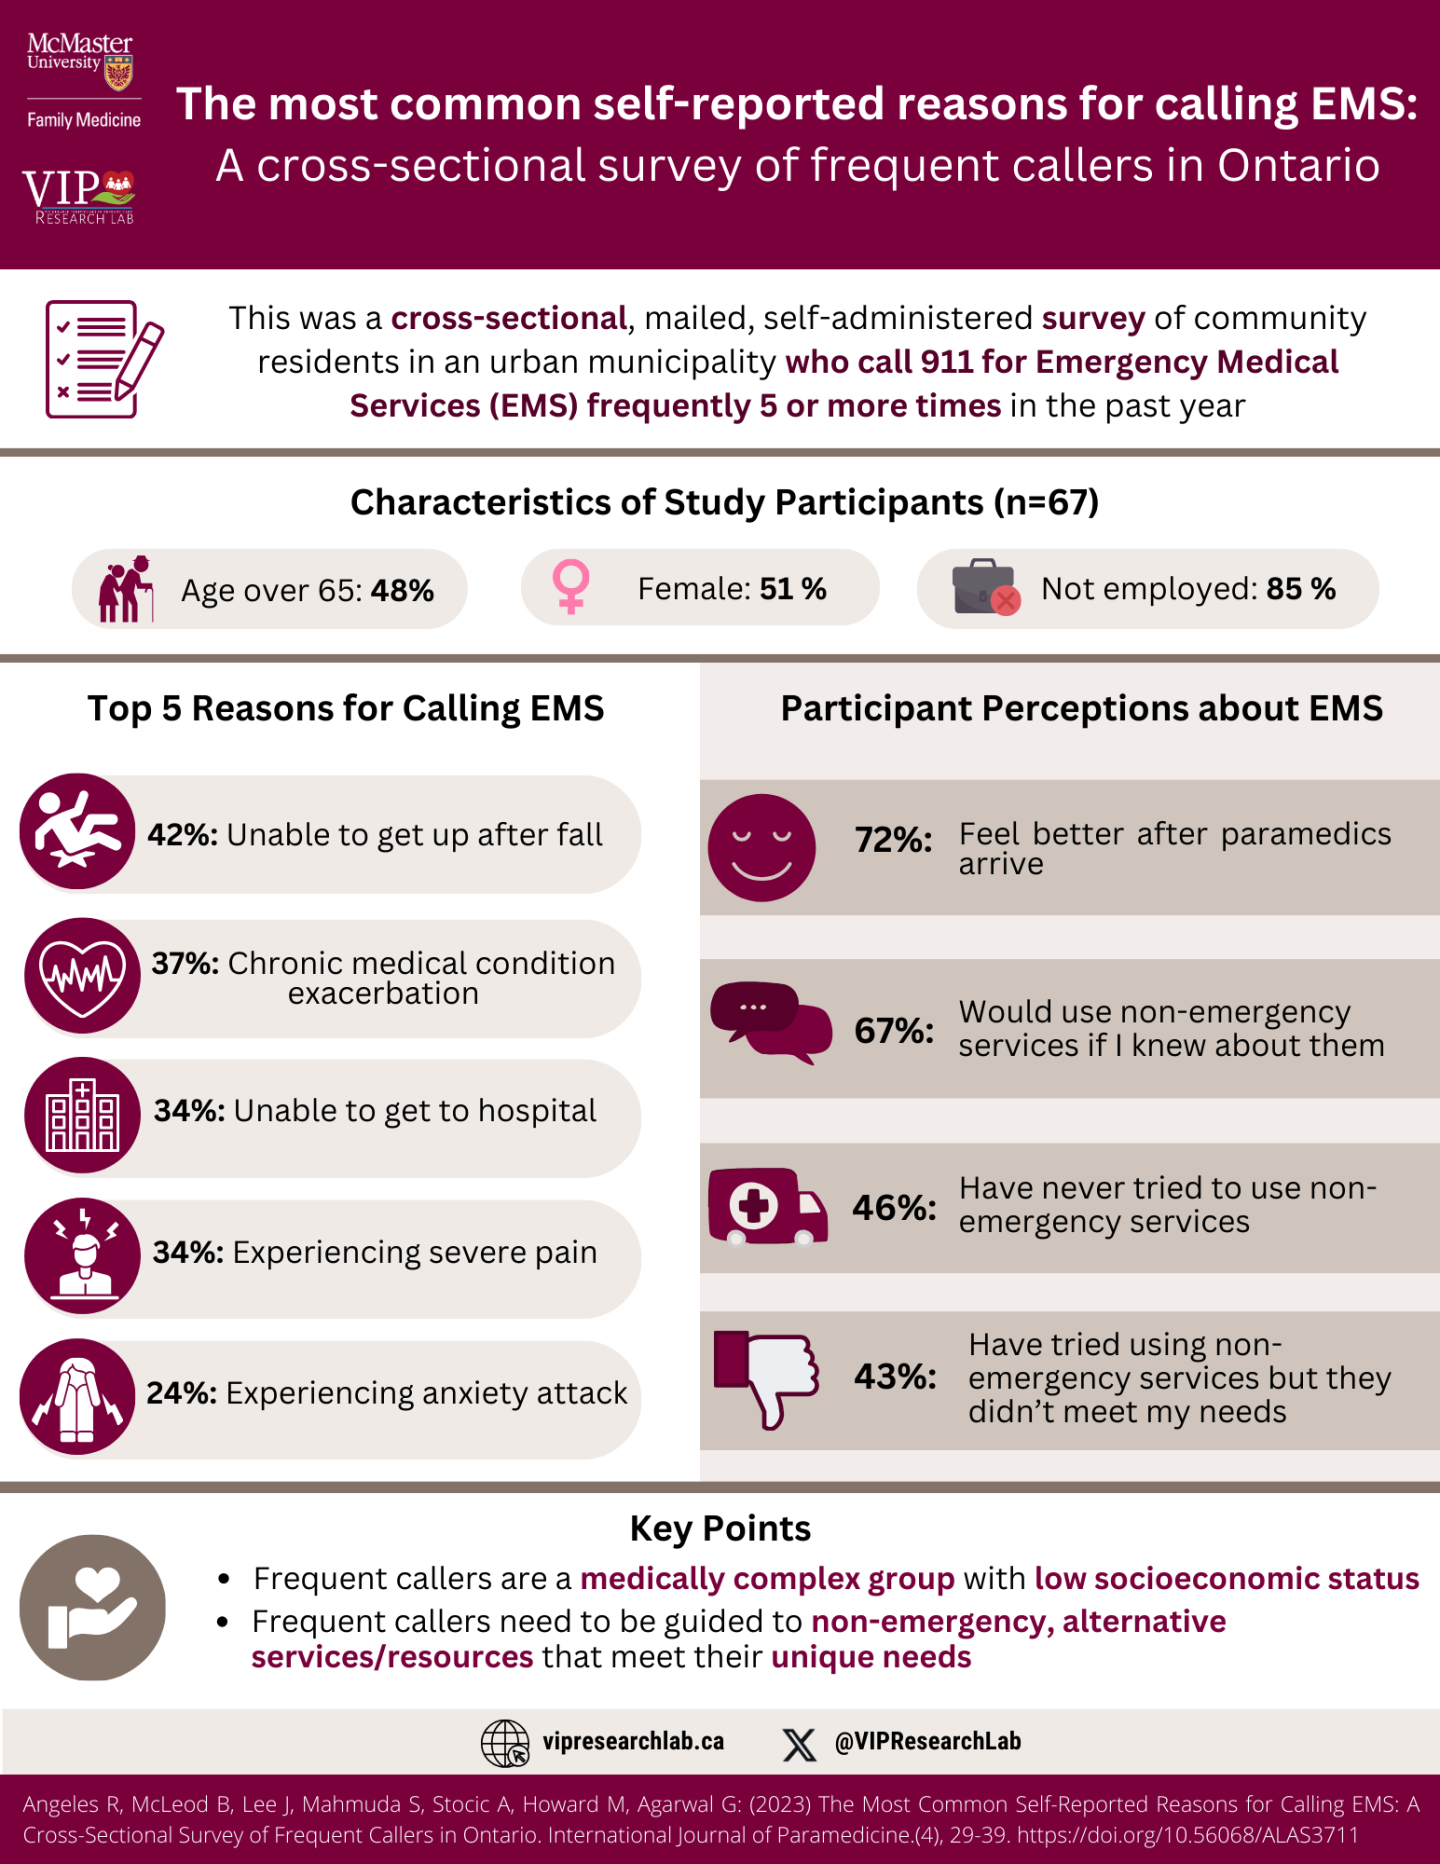 The title written at the top of this infographic is, The most common self-reported reasons for calling EMS: A cross-sectional survey of frequent callers in Ontario. Beside the title towards the left are the logos for McMaster University Family Medicine and VIP Research Lab. Below the title, to the left of the infographic there is an icon of a pen and a checklist on a paper with text beside it that says, This was a cross-sectional, mailed, self-administered survey of community residents in an urban municipality who call 911 ﻿for Emergency Medical Services (EMS) frequently 5 or more times in the past year. Beneath this is a text that says Characteristics of Study Participants (n=67). Under this text are three elongated grey-coloured ovals that are centered on the infographic. In the first one, towards the left is an icon of an elderly man and woman with text that says Age over 65: 48%. In the second oval is a pink symbol representing females text that says Female: 51%. The third one, towards the right, has a symbol of a dark grey briefcase with a red x with text that says Not employed: 85%. The middle of the infographic is split into two columns. The left has a subheading that says Top 5 Reasons for Calling EMS. Below this are 5 white icons with burgundy circles behind them and grey elongated ovals with text in them to describe the icons. The first one is an icon of a person who has fallen down, with text beside it that says 42%: Unable to get up after fall. The second is an icon of a heart with an electrical signal in it with text beside it that says 37%: Chronic medical condition exacerbation. The third is an icon of a hospital with text beside it that says 34%: Unable to get to hospital. The fourth is an icon of a male person with shock signs above his head with text beside it that says, 34%: Experiencing severe pain. The last one is an icon of a person sitting on the ground with their hands to their head and shock waves beside them. The text beside it says, 24%: Experiencing anxiety attack. The column on the left has a subheading that says Participant Perceptions about EMS. Below that are 4 grey rectangles with burgundy and white icons on the left and text to the right of each of the icons. The first rectangle includes a smiley face icon with text beside it that says 72%: Feel better after paramedics arrive. The second one has a message icon with text beside it saying 67%: Would use non-emergency services if I knew about them. Under that is an ambulance icon with the text beside it saying 46% Have never tried to use non-emergency services. The last one includes a thumbs-down icon with text beside it saying 43%: Have tried using non-emergency services but they didn’t meet my needs. Towards the bottom of the page, there is a subheading titled key points. Below that is an icon of a hand with a heart above it with two bullet points beside it that say Frequent callers are a medically complex group with low socioeconomic status, and Frequent callers need to be guided to non-emergency, alternative services/resources that meet their unique needs. Across the bottom of the infographic from left to right is a website icon accompanied by the website name vipresearchlab.ca and the logo for the social media platform X accompanied by the handle @VIPResearchLab.